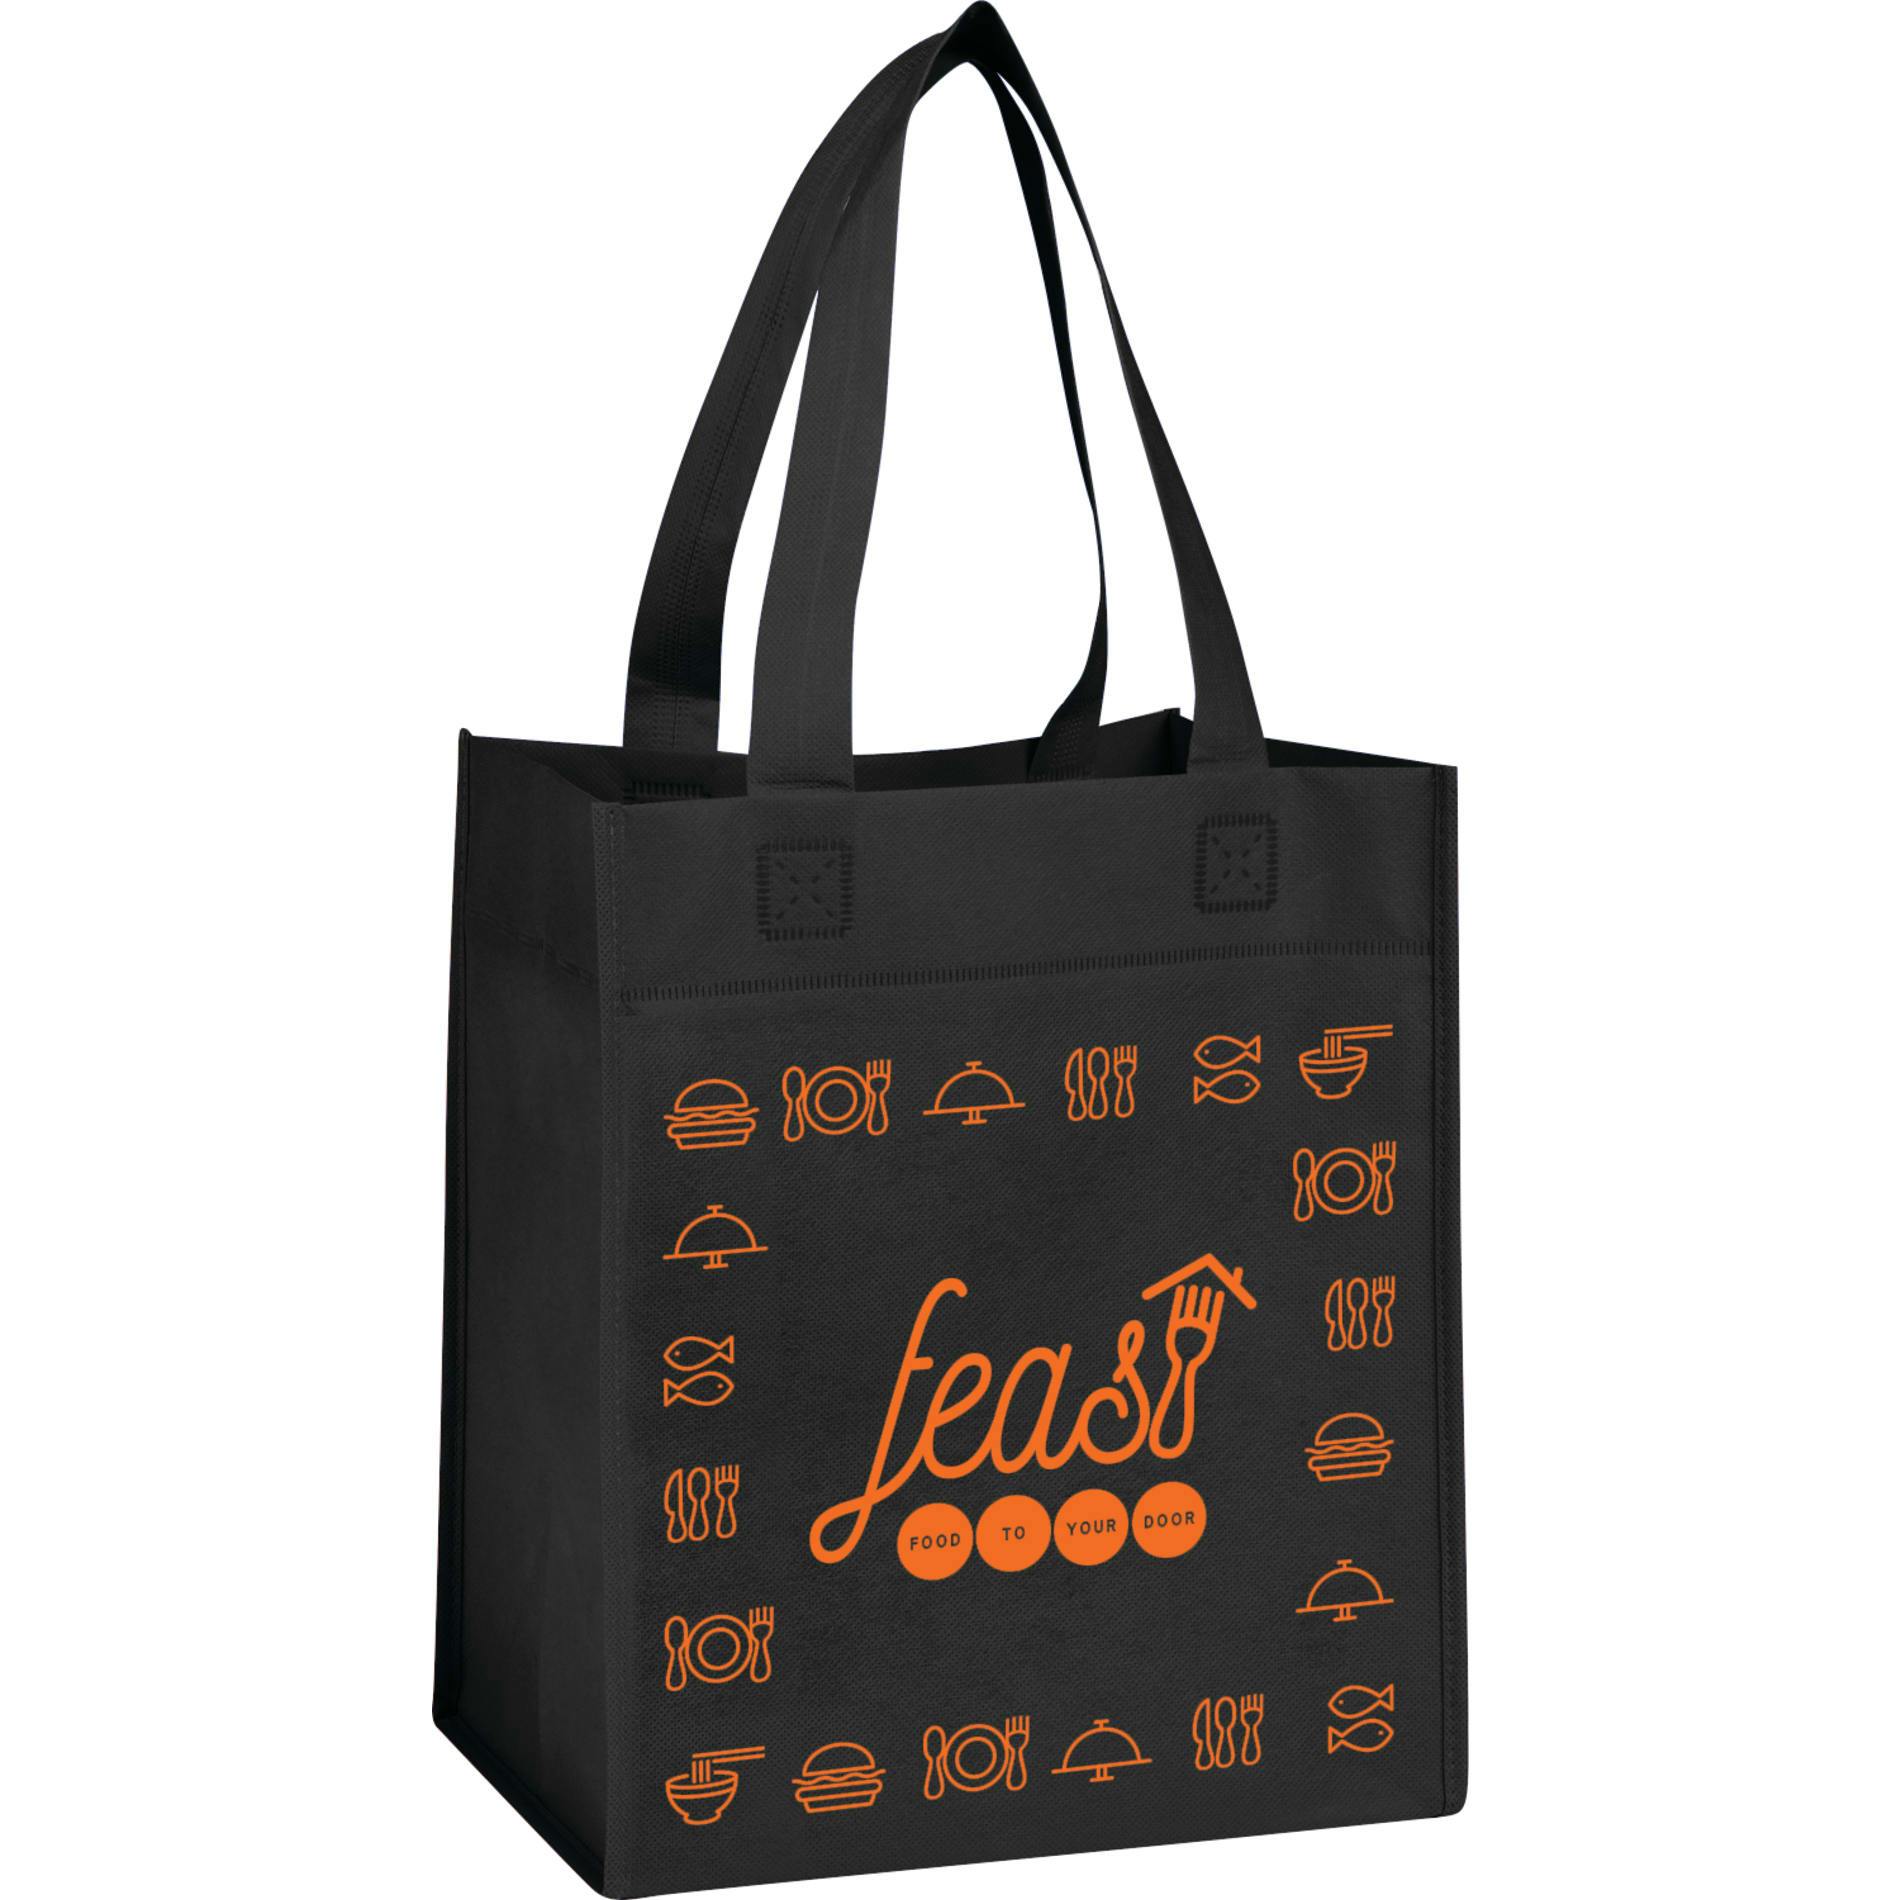 Basic Grocery Tote - additional Image 3